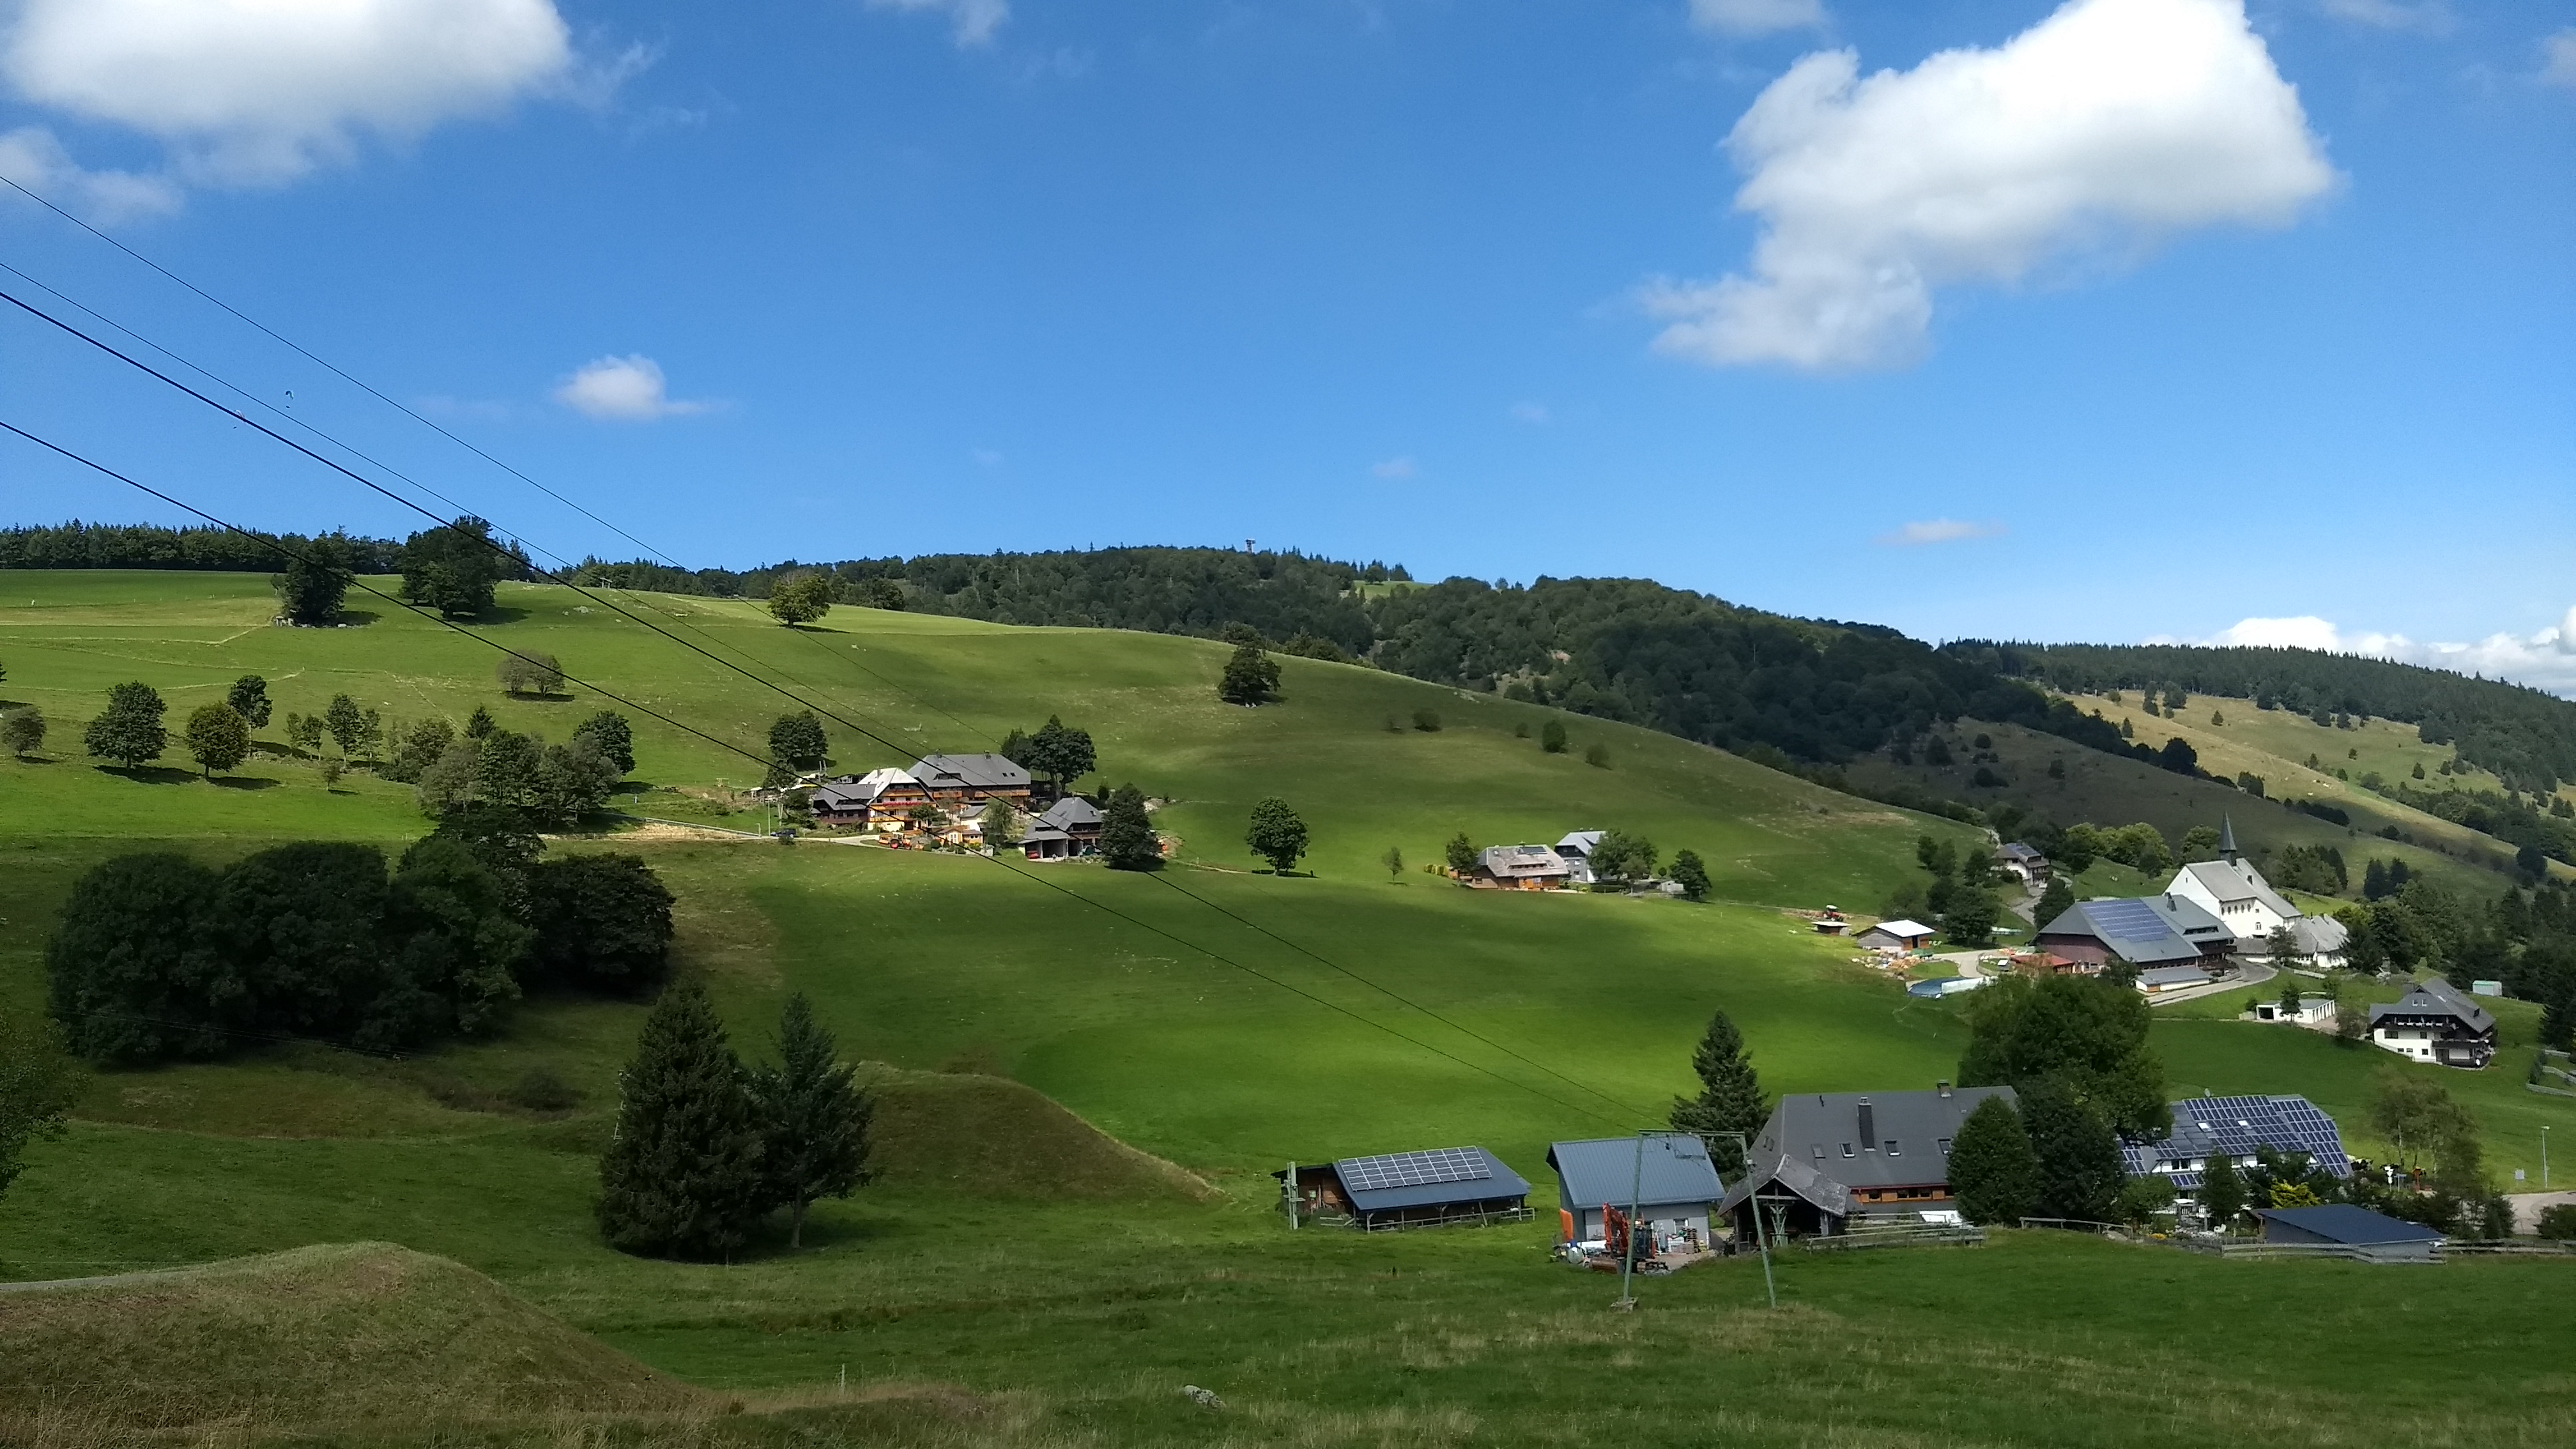 View of Hofgrund from the road up to Schauinsland, after getting off the bus.